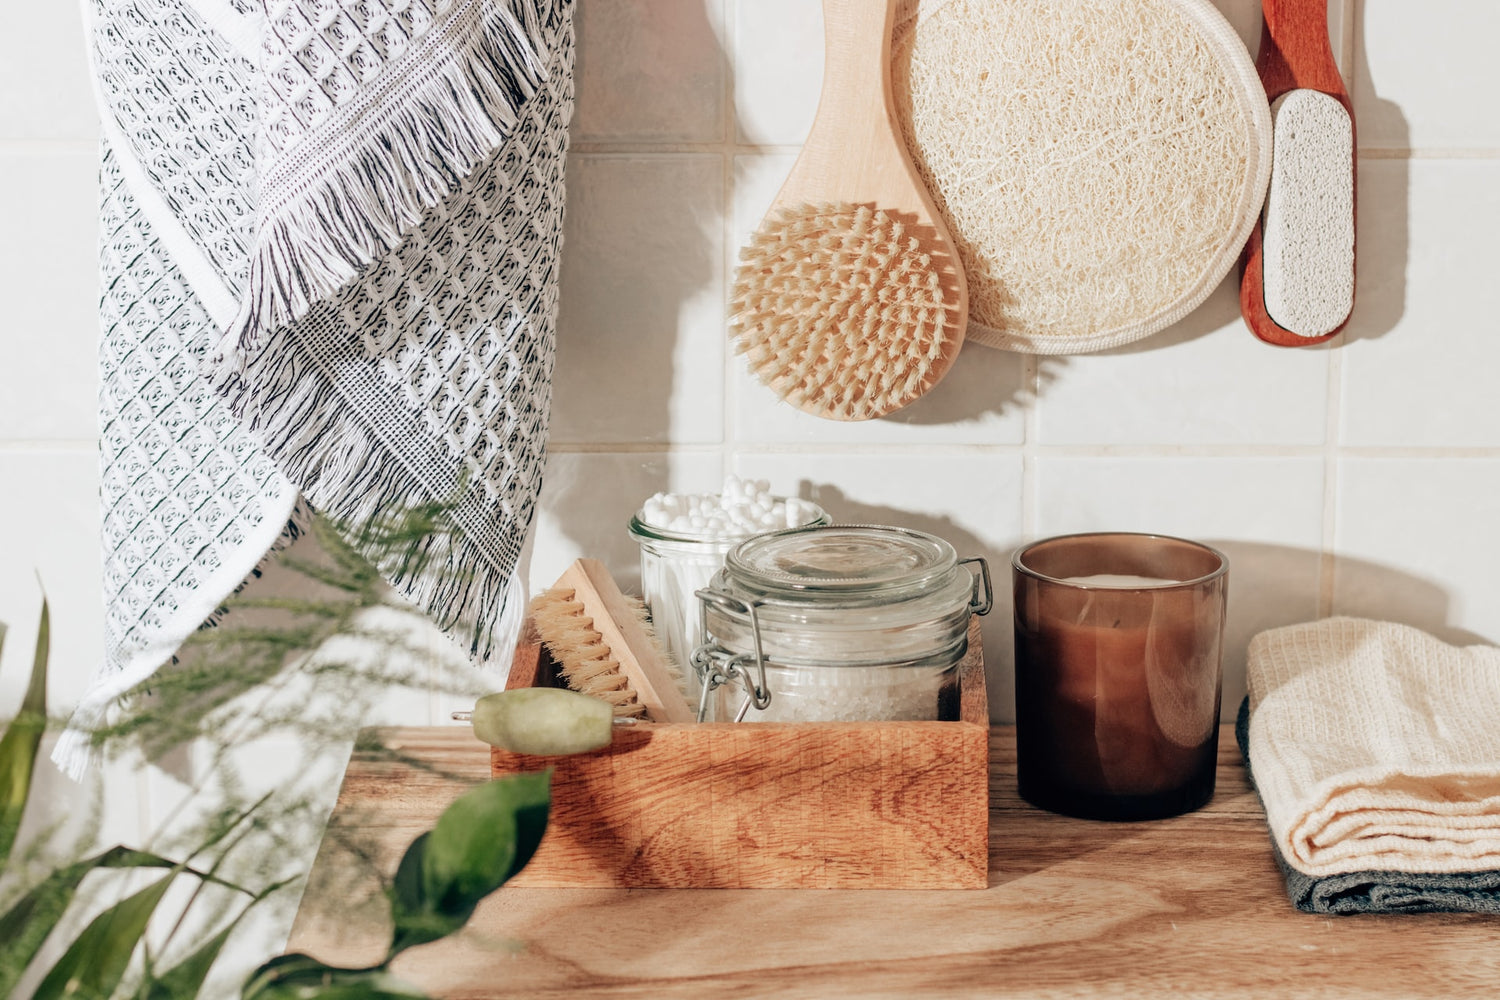 How To Exfoliate for Acne-Prone Skin